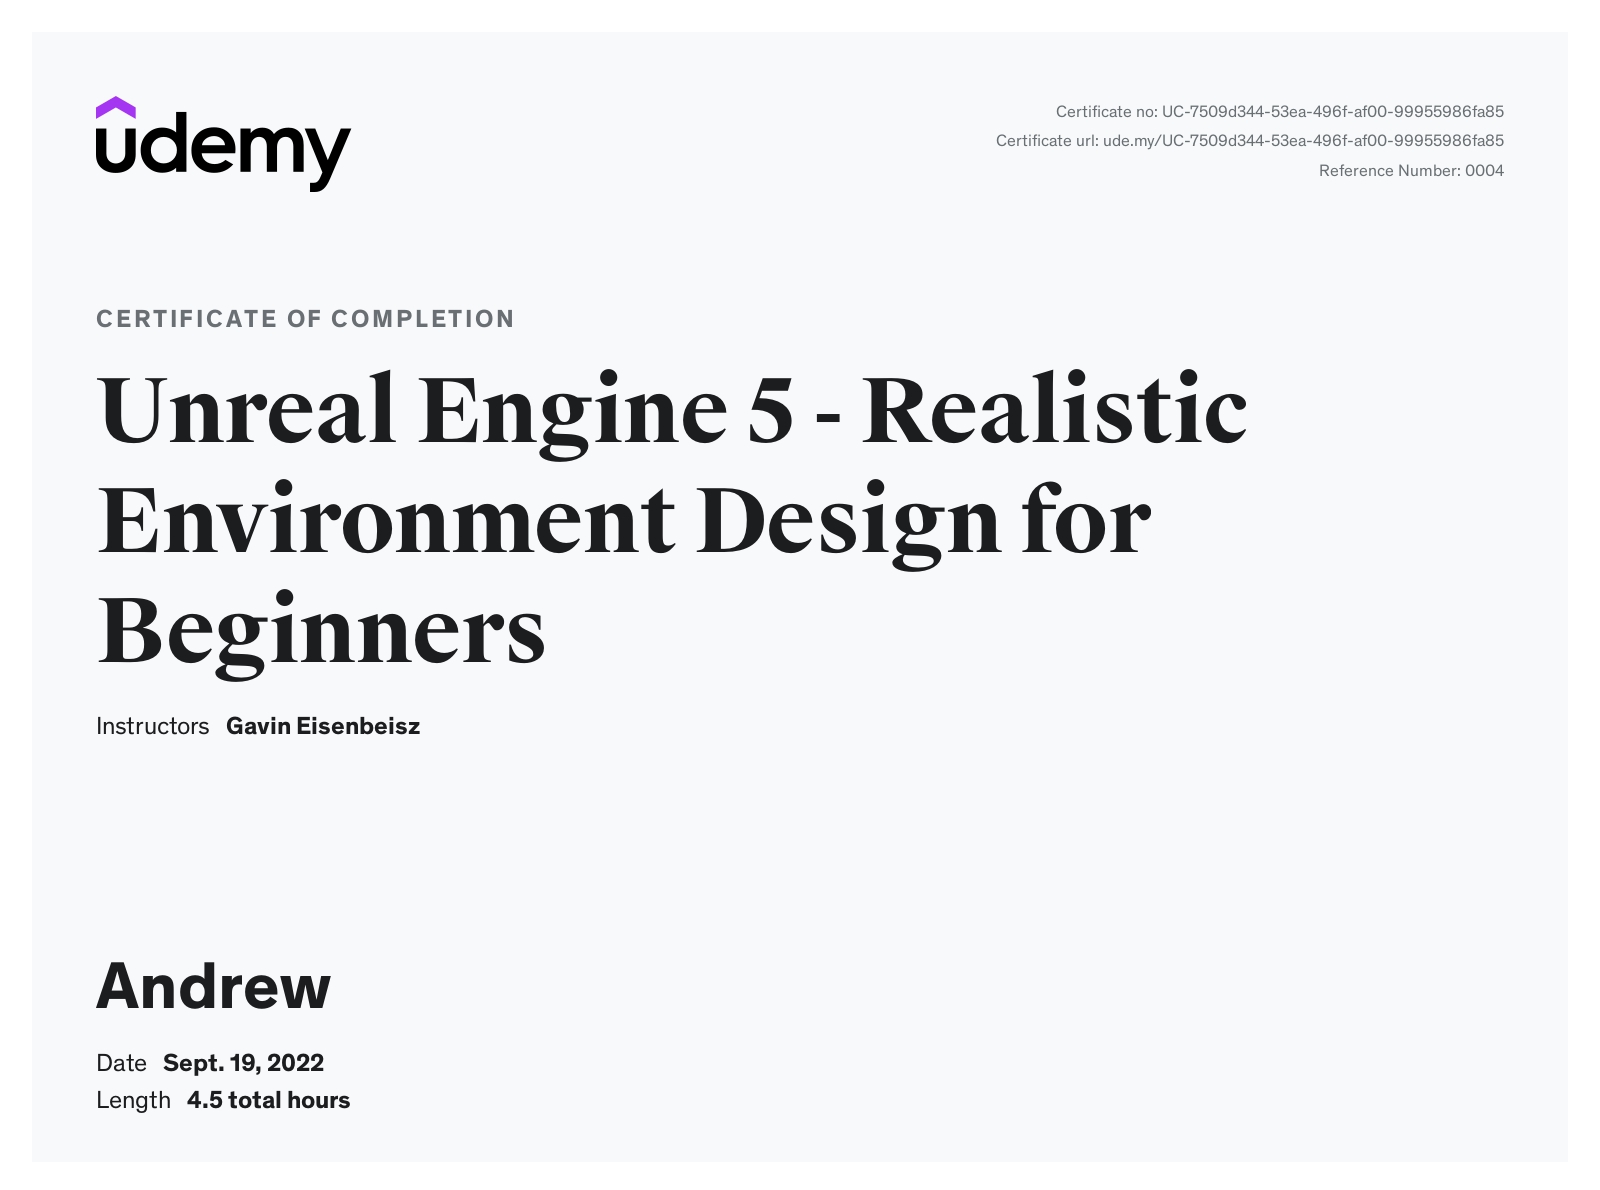 Unreal Engine 5 - Realistic Environment Design for Beginners